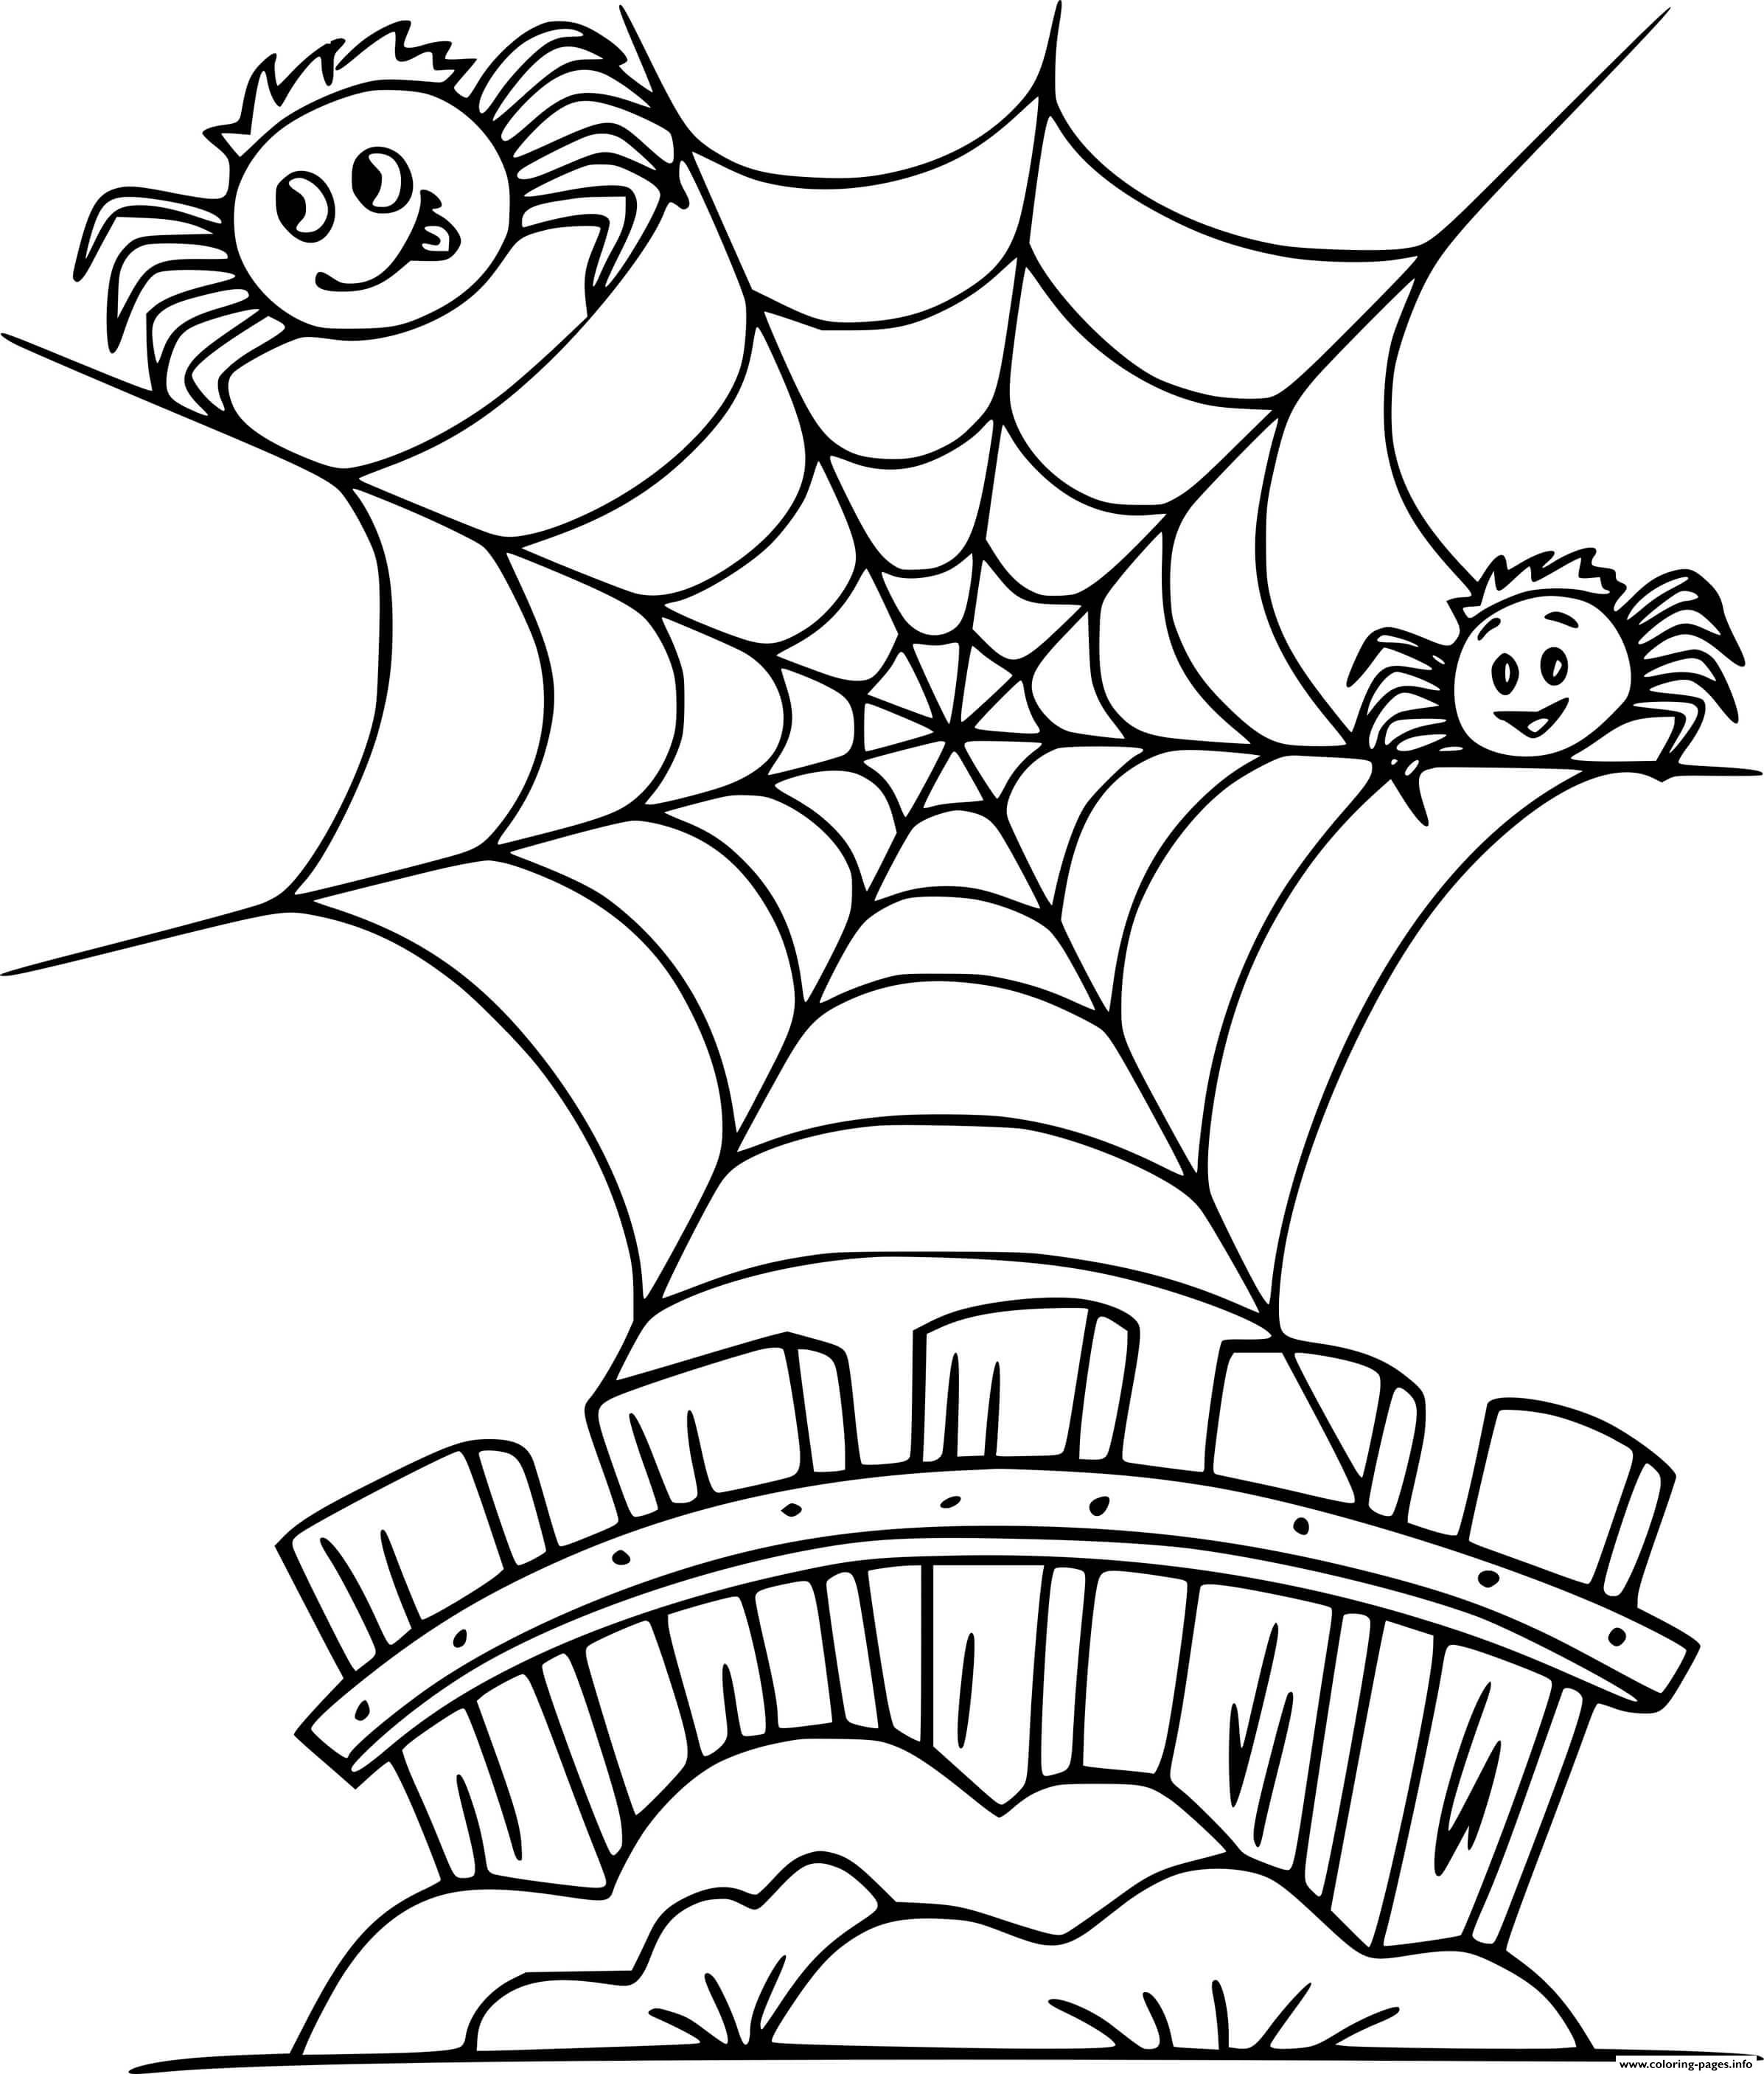 Two Cartoon Spiders On The Web coloring